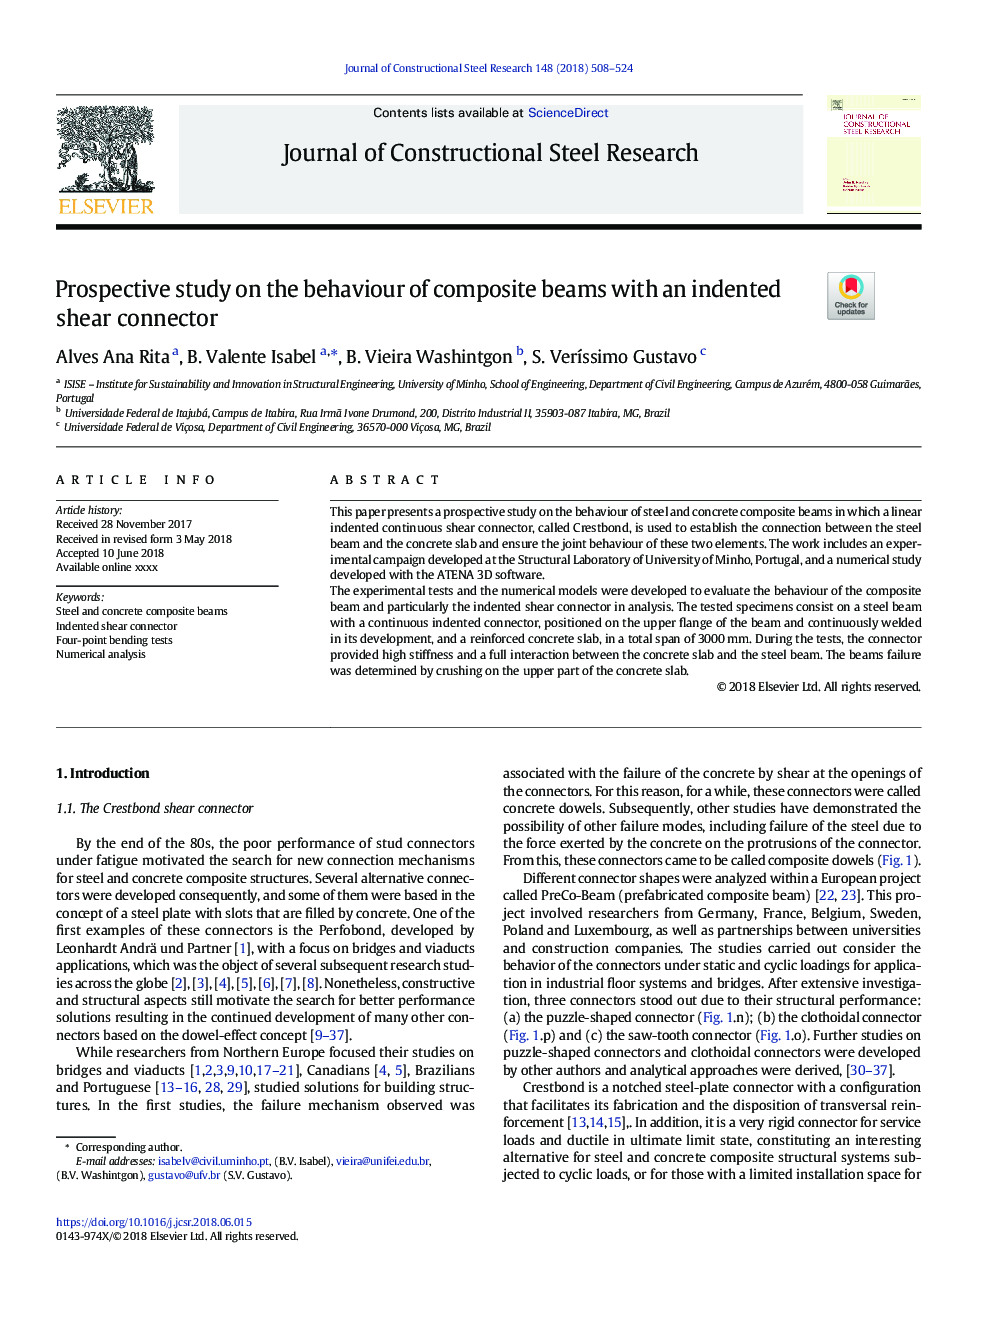 Prospective study on the behaviour of composite beams with an indented shear connector